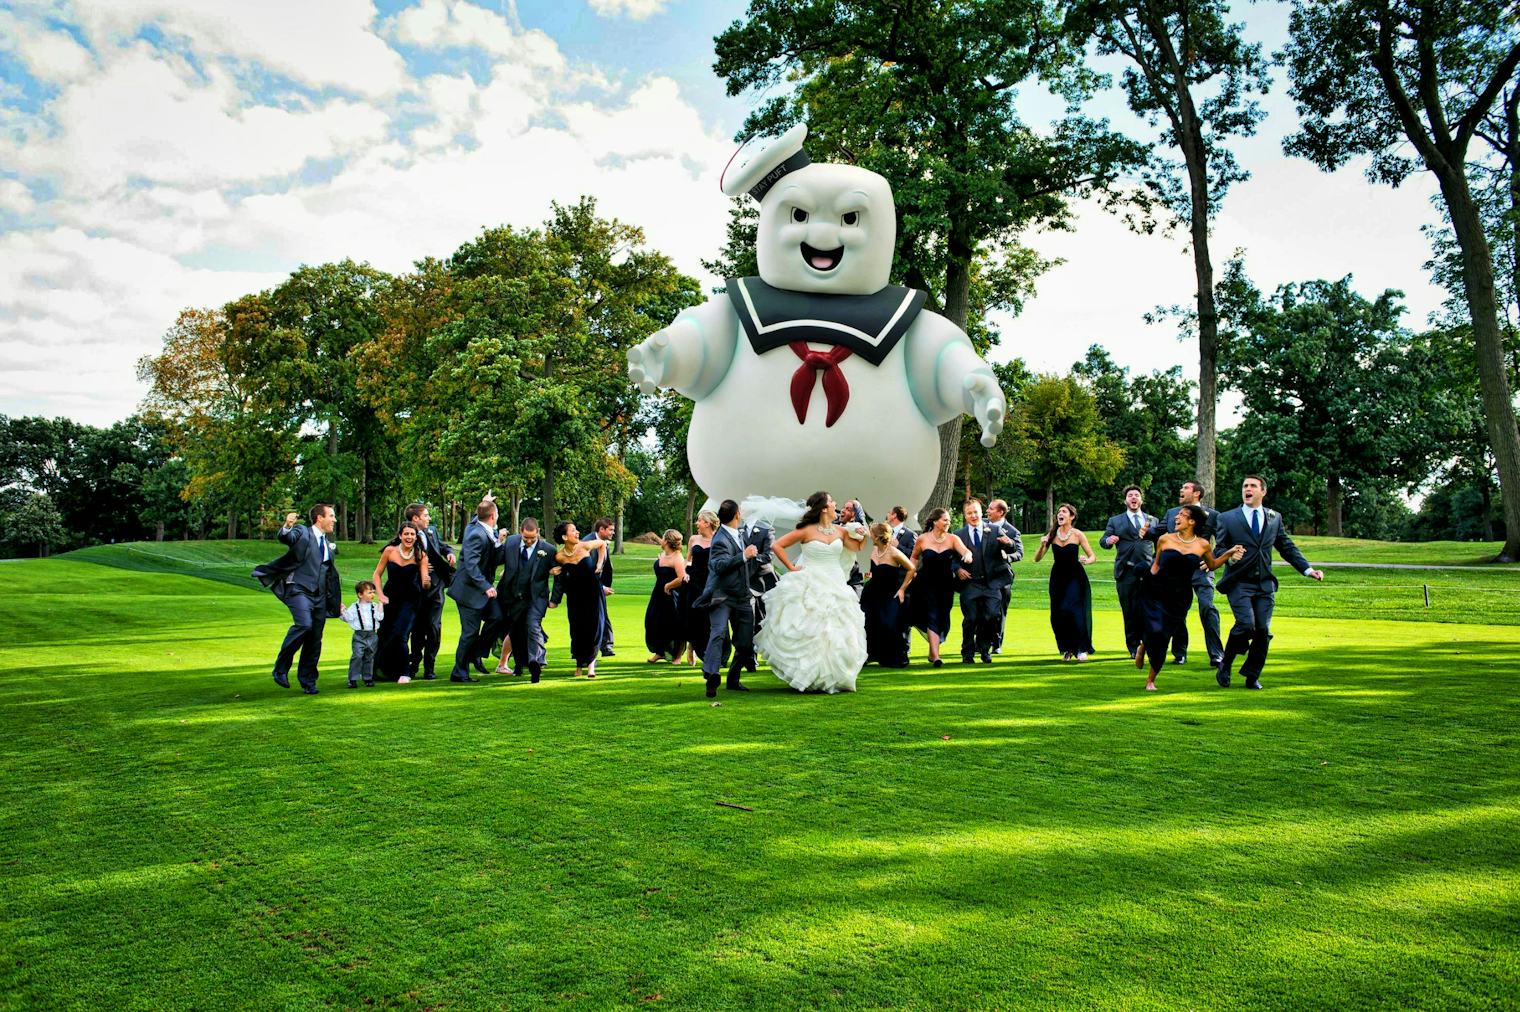 11 Funny Wedding Photo Ideas That Will Add Some Hilarity to Your